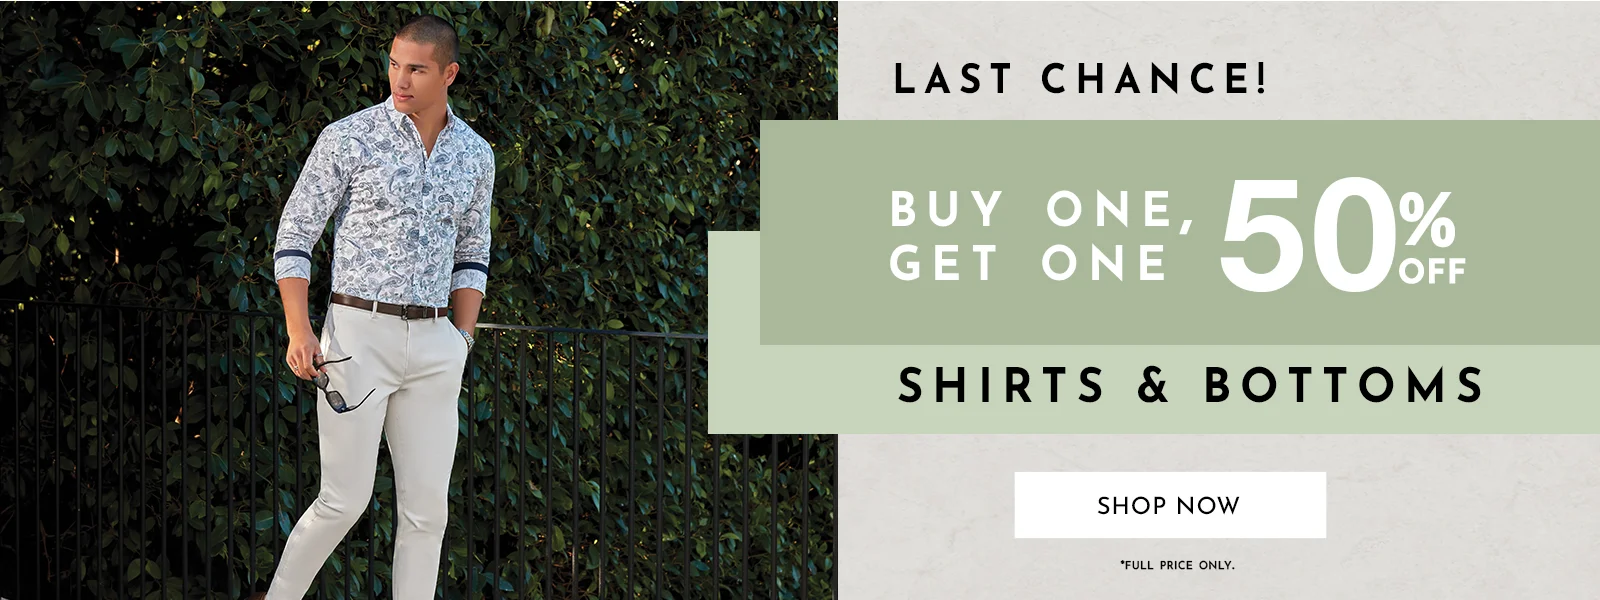 Buy 1 get 1 50% OFF on all shirts & bottoms at Tarocash